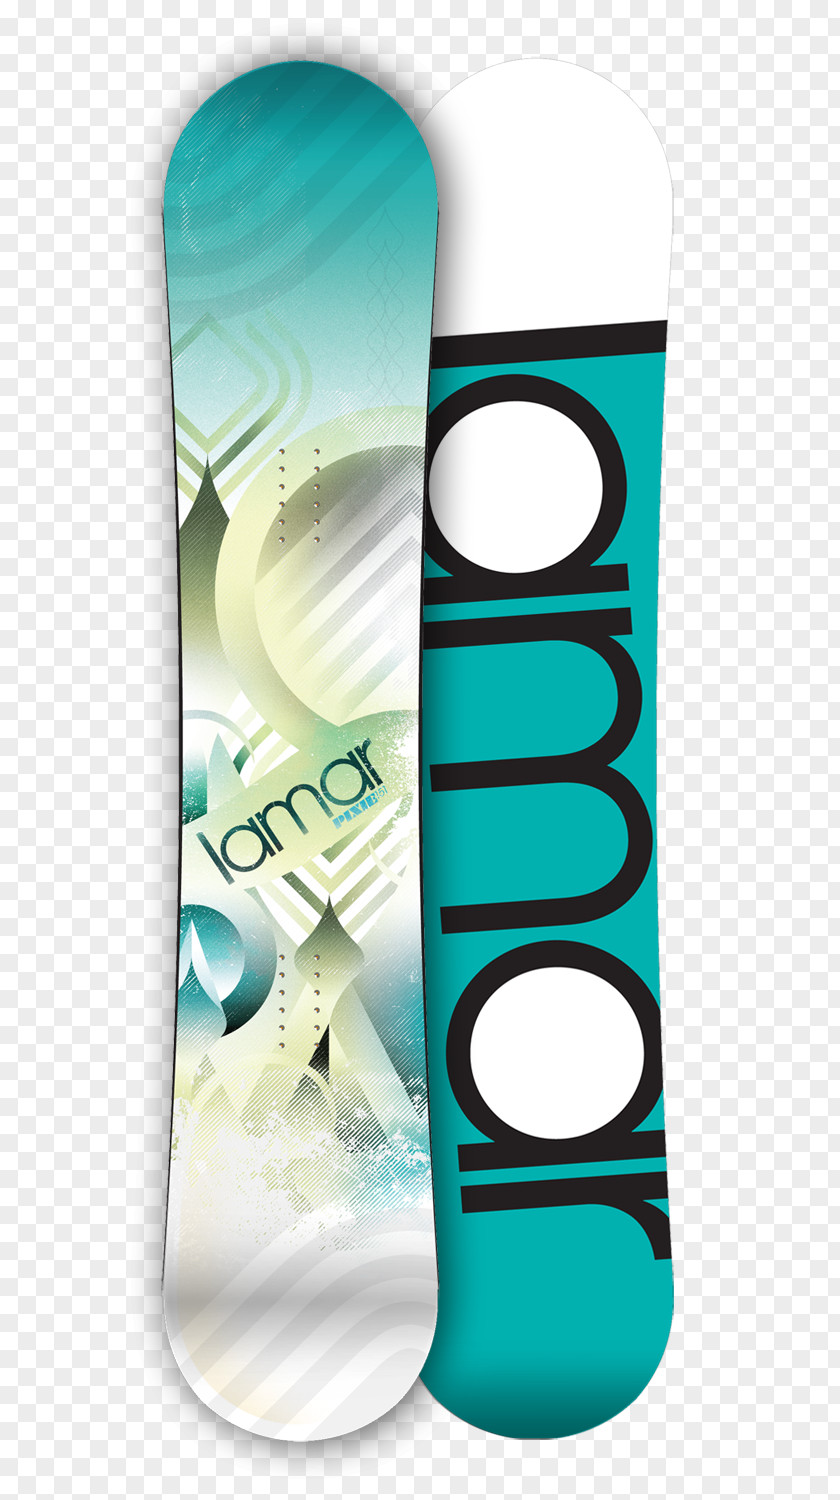 Snowboard Graphic Design PNG